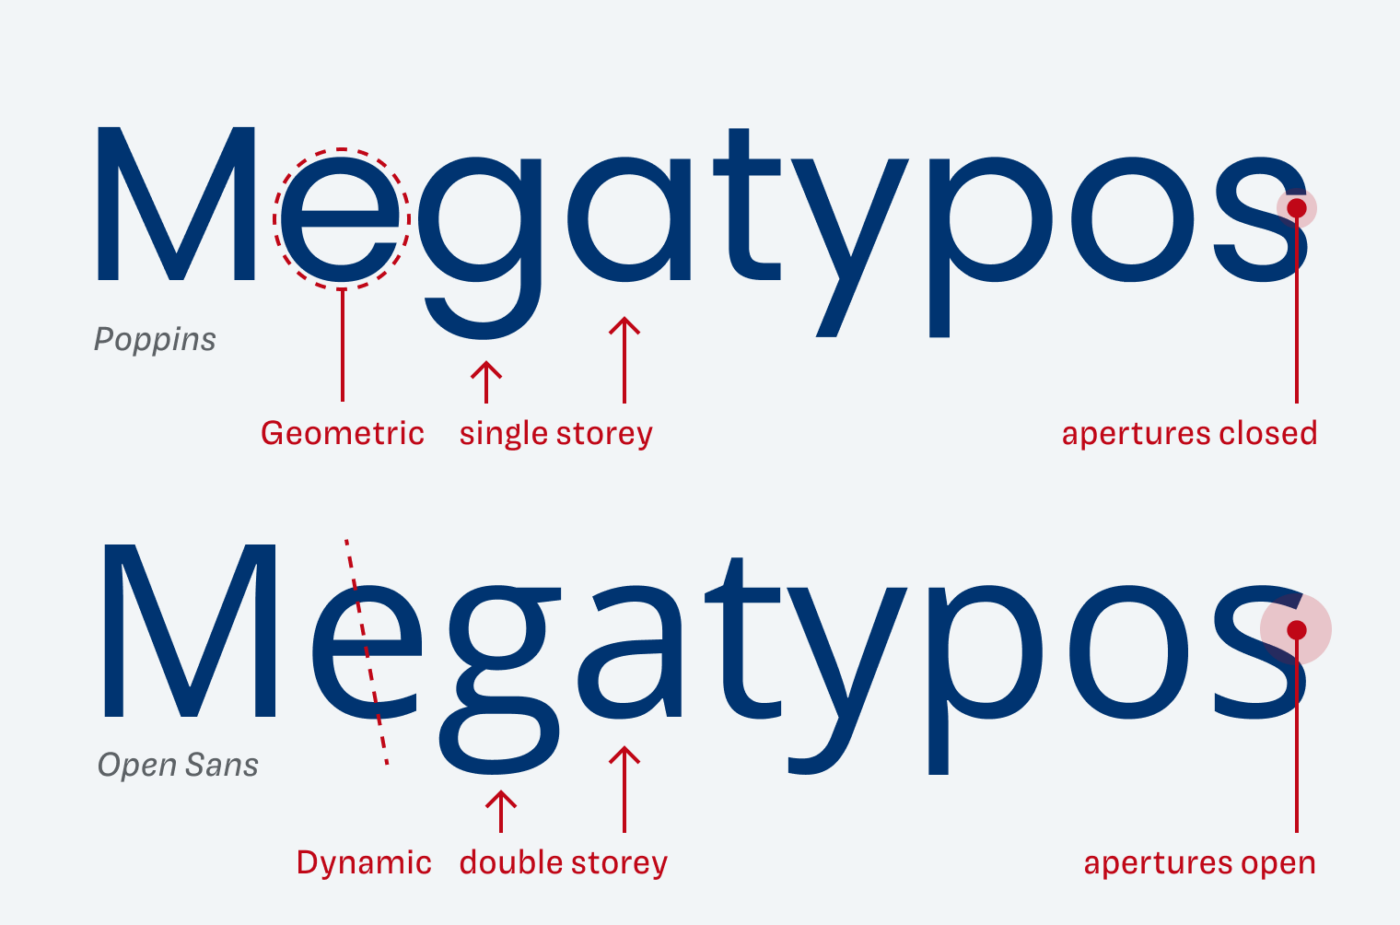 Poppins has geometric letter shapes, a single storey g and a, and closed apertures. Open Sans has dynamic letter shapes, a double storey g and a, and open apertures,